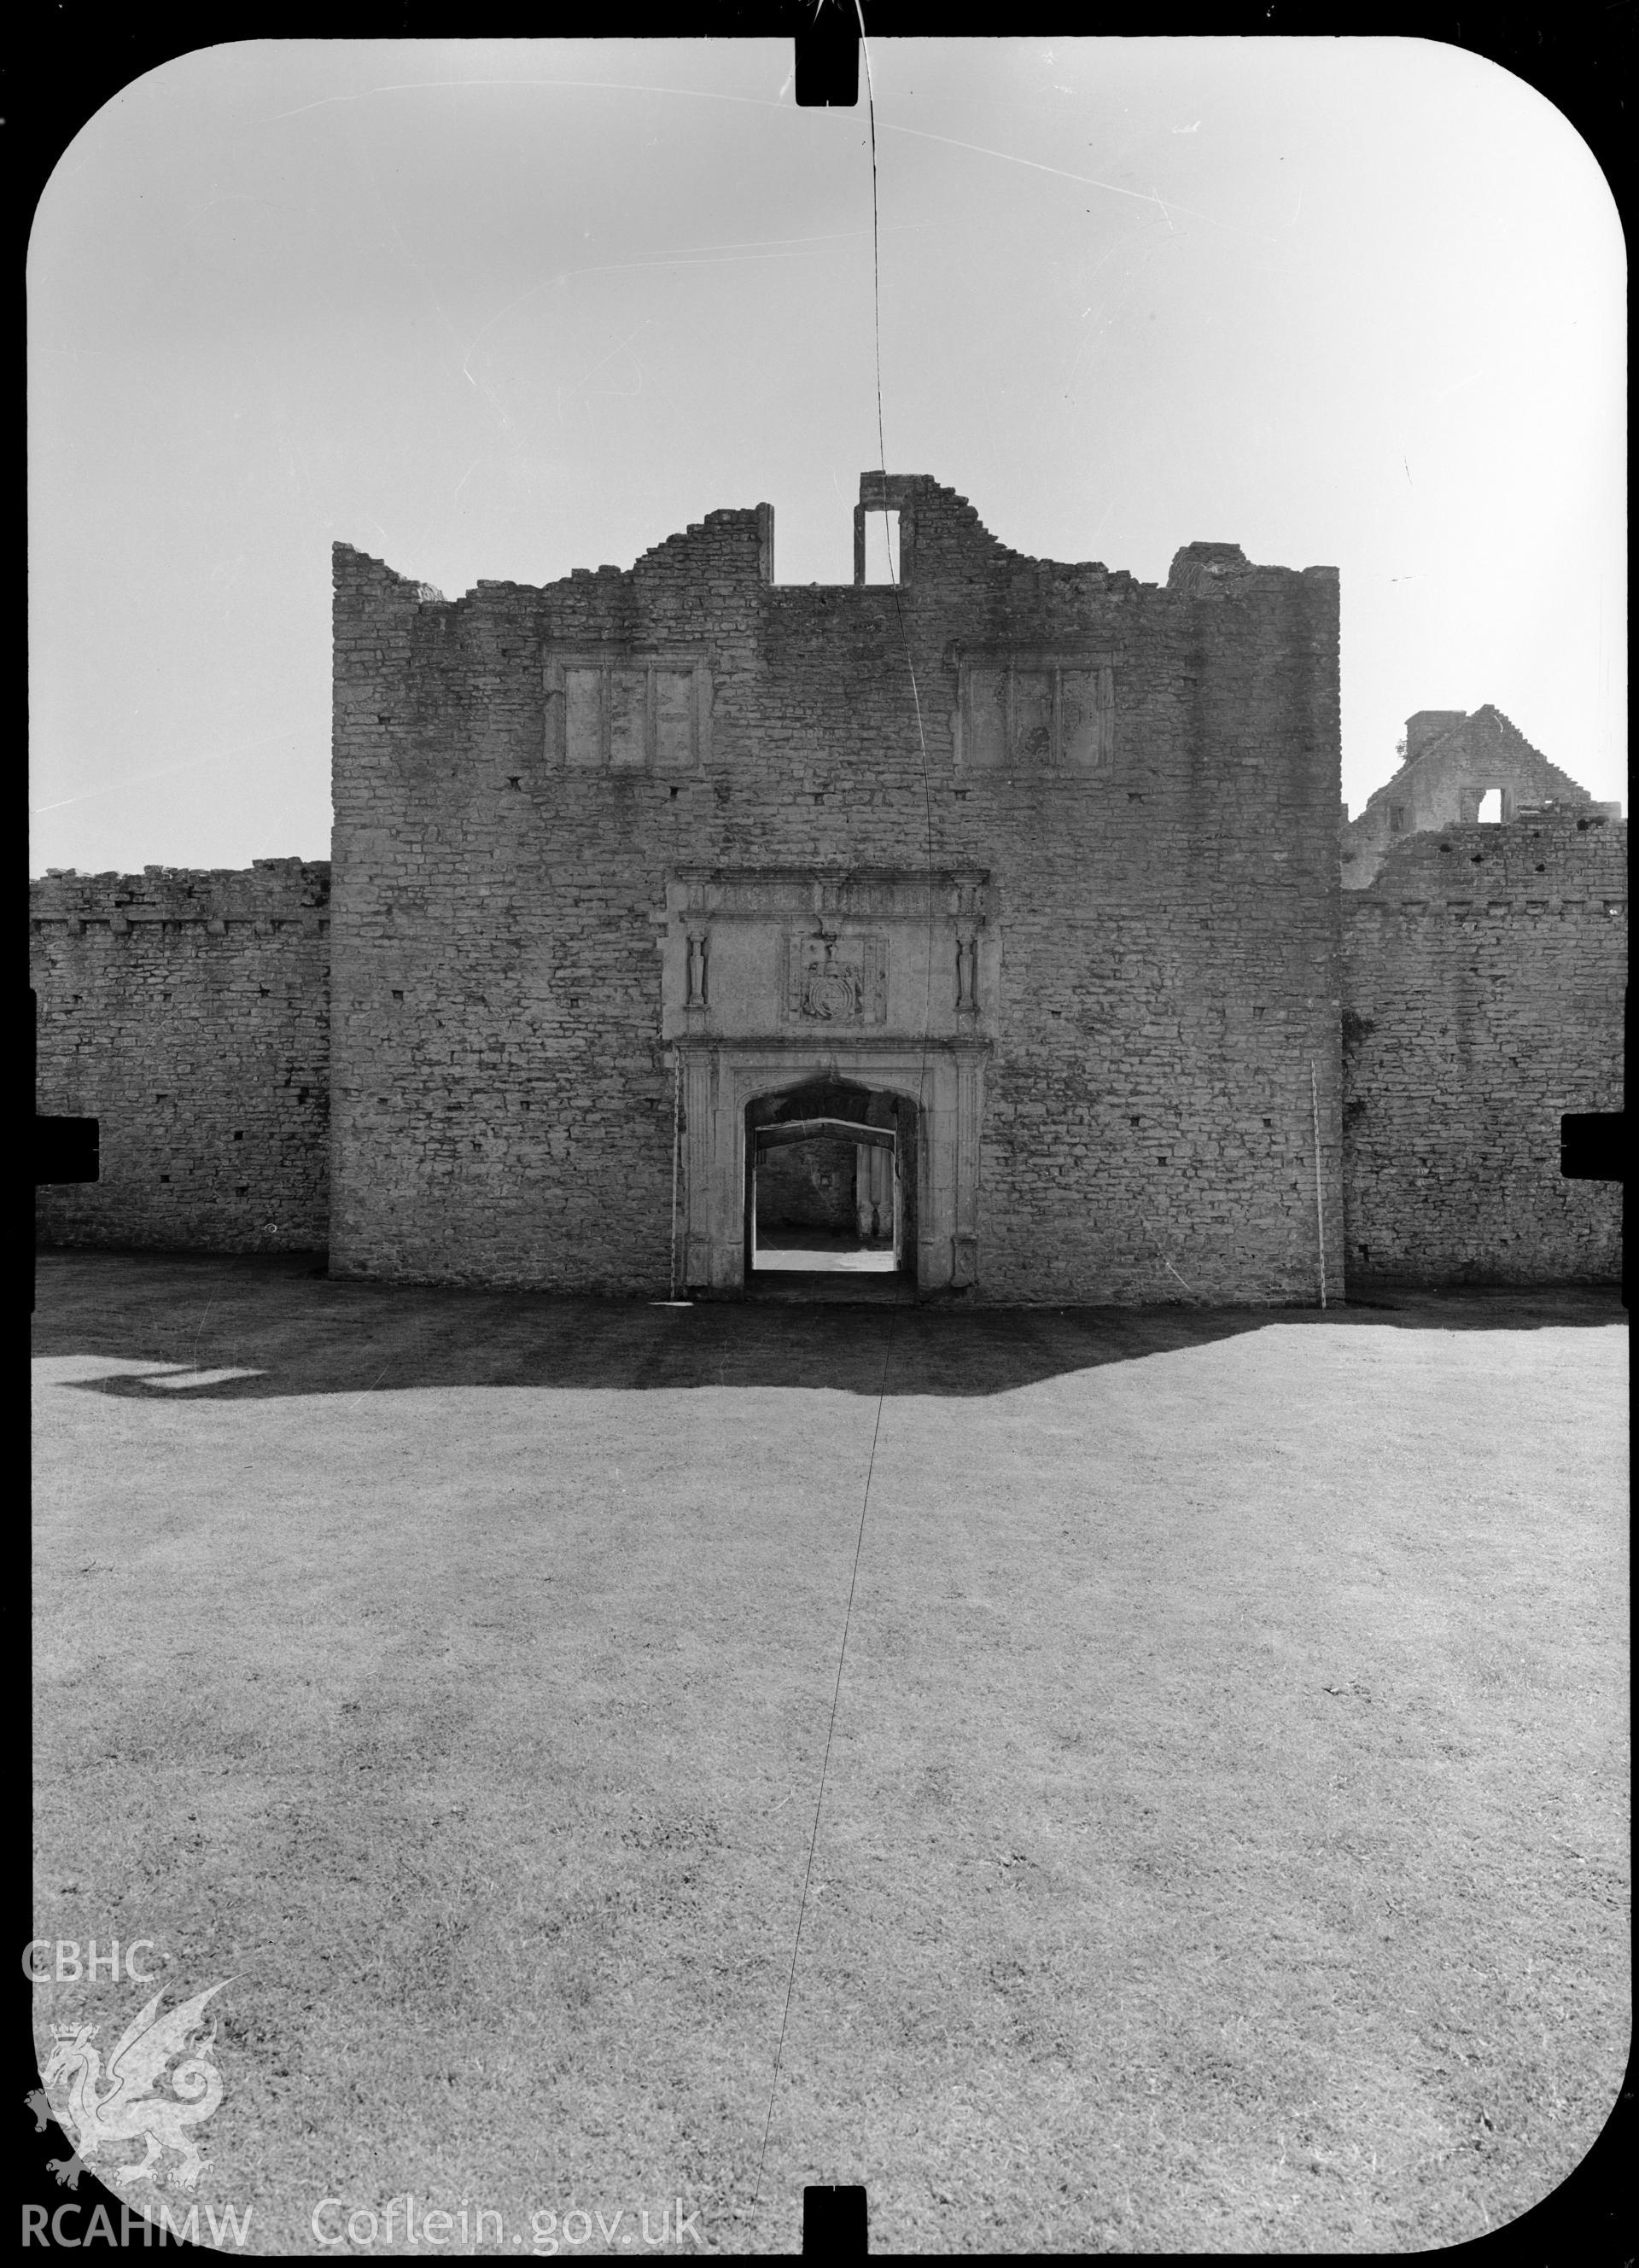 Mono photogrammetric photo showing the gatehouse at Old Beaupre.